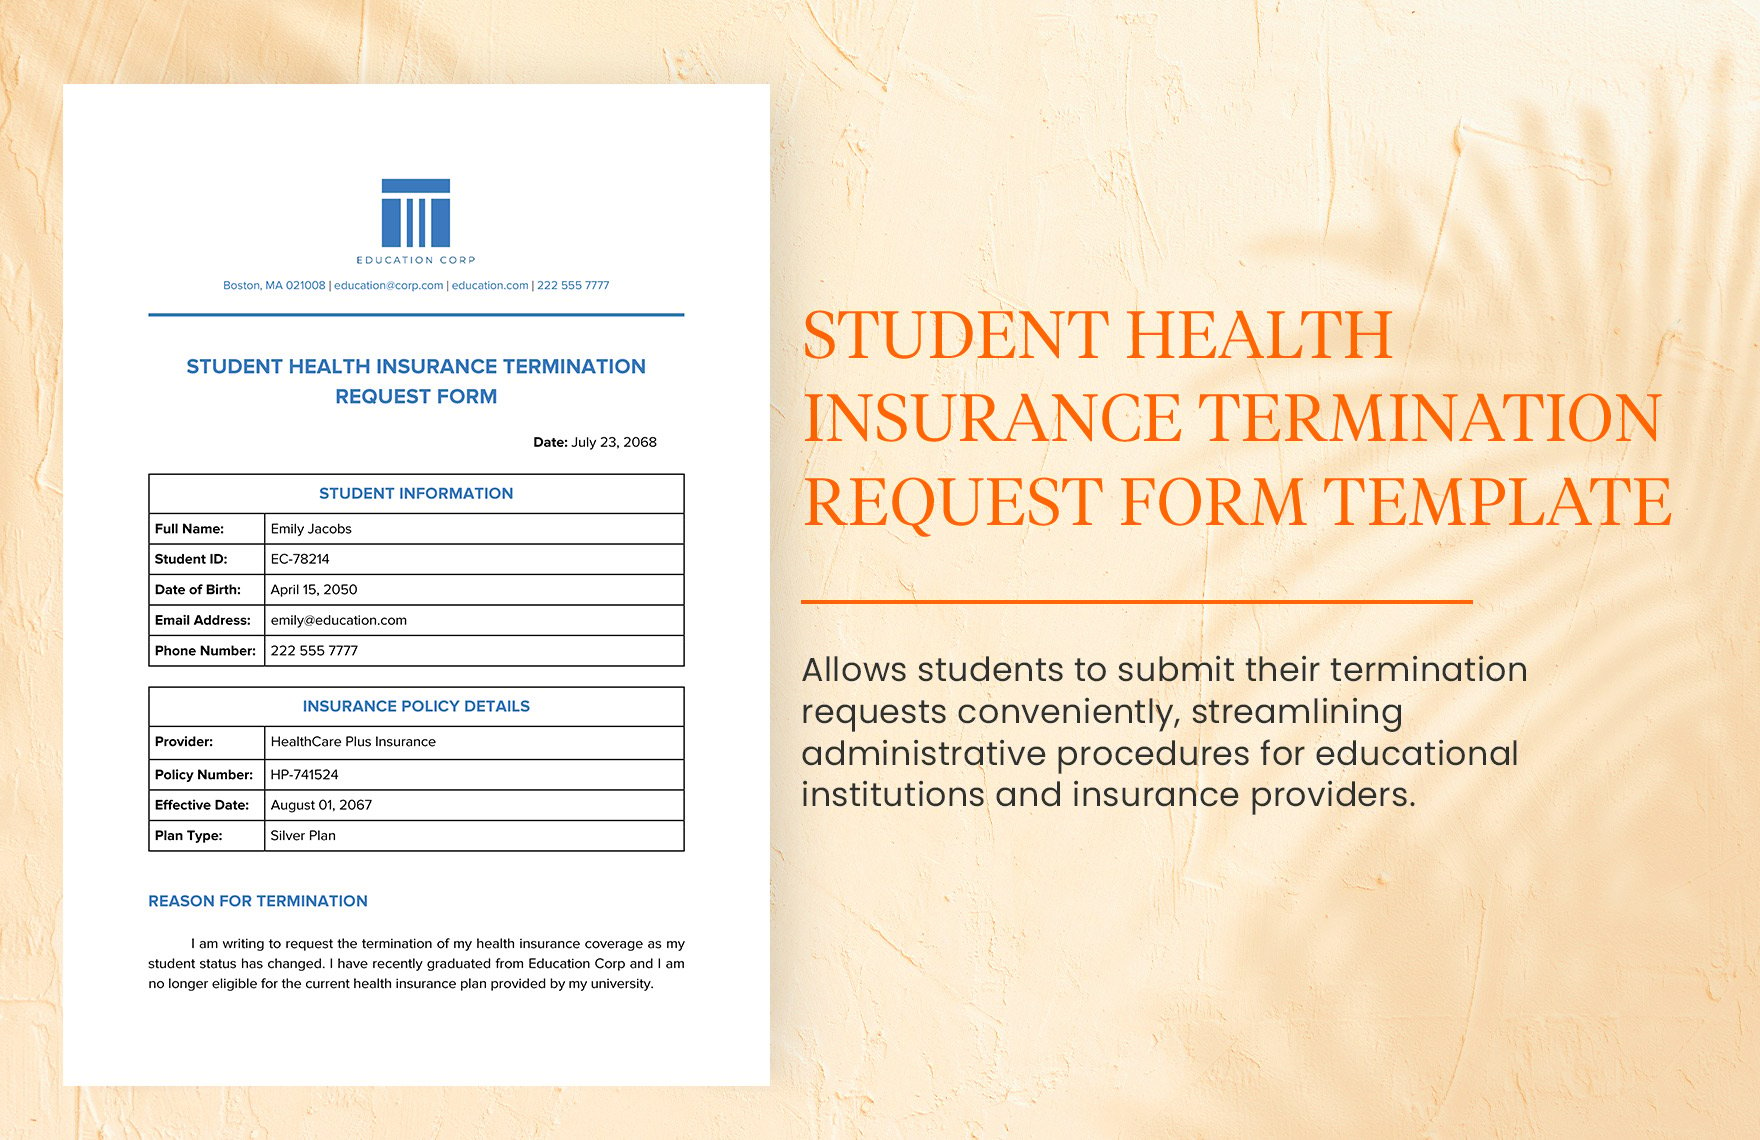 Student Health Insurance Termination Request Form Template